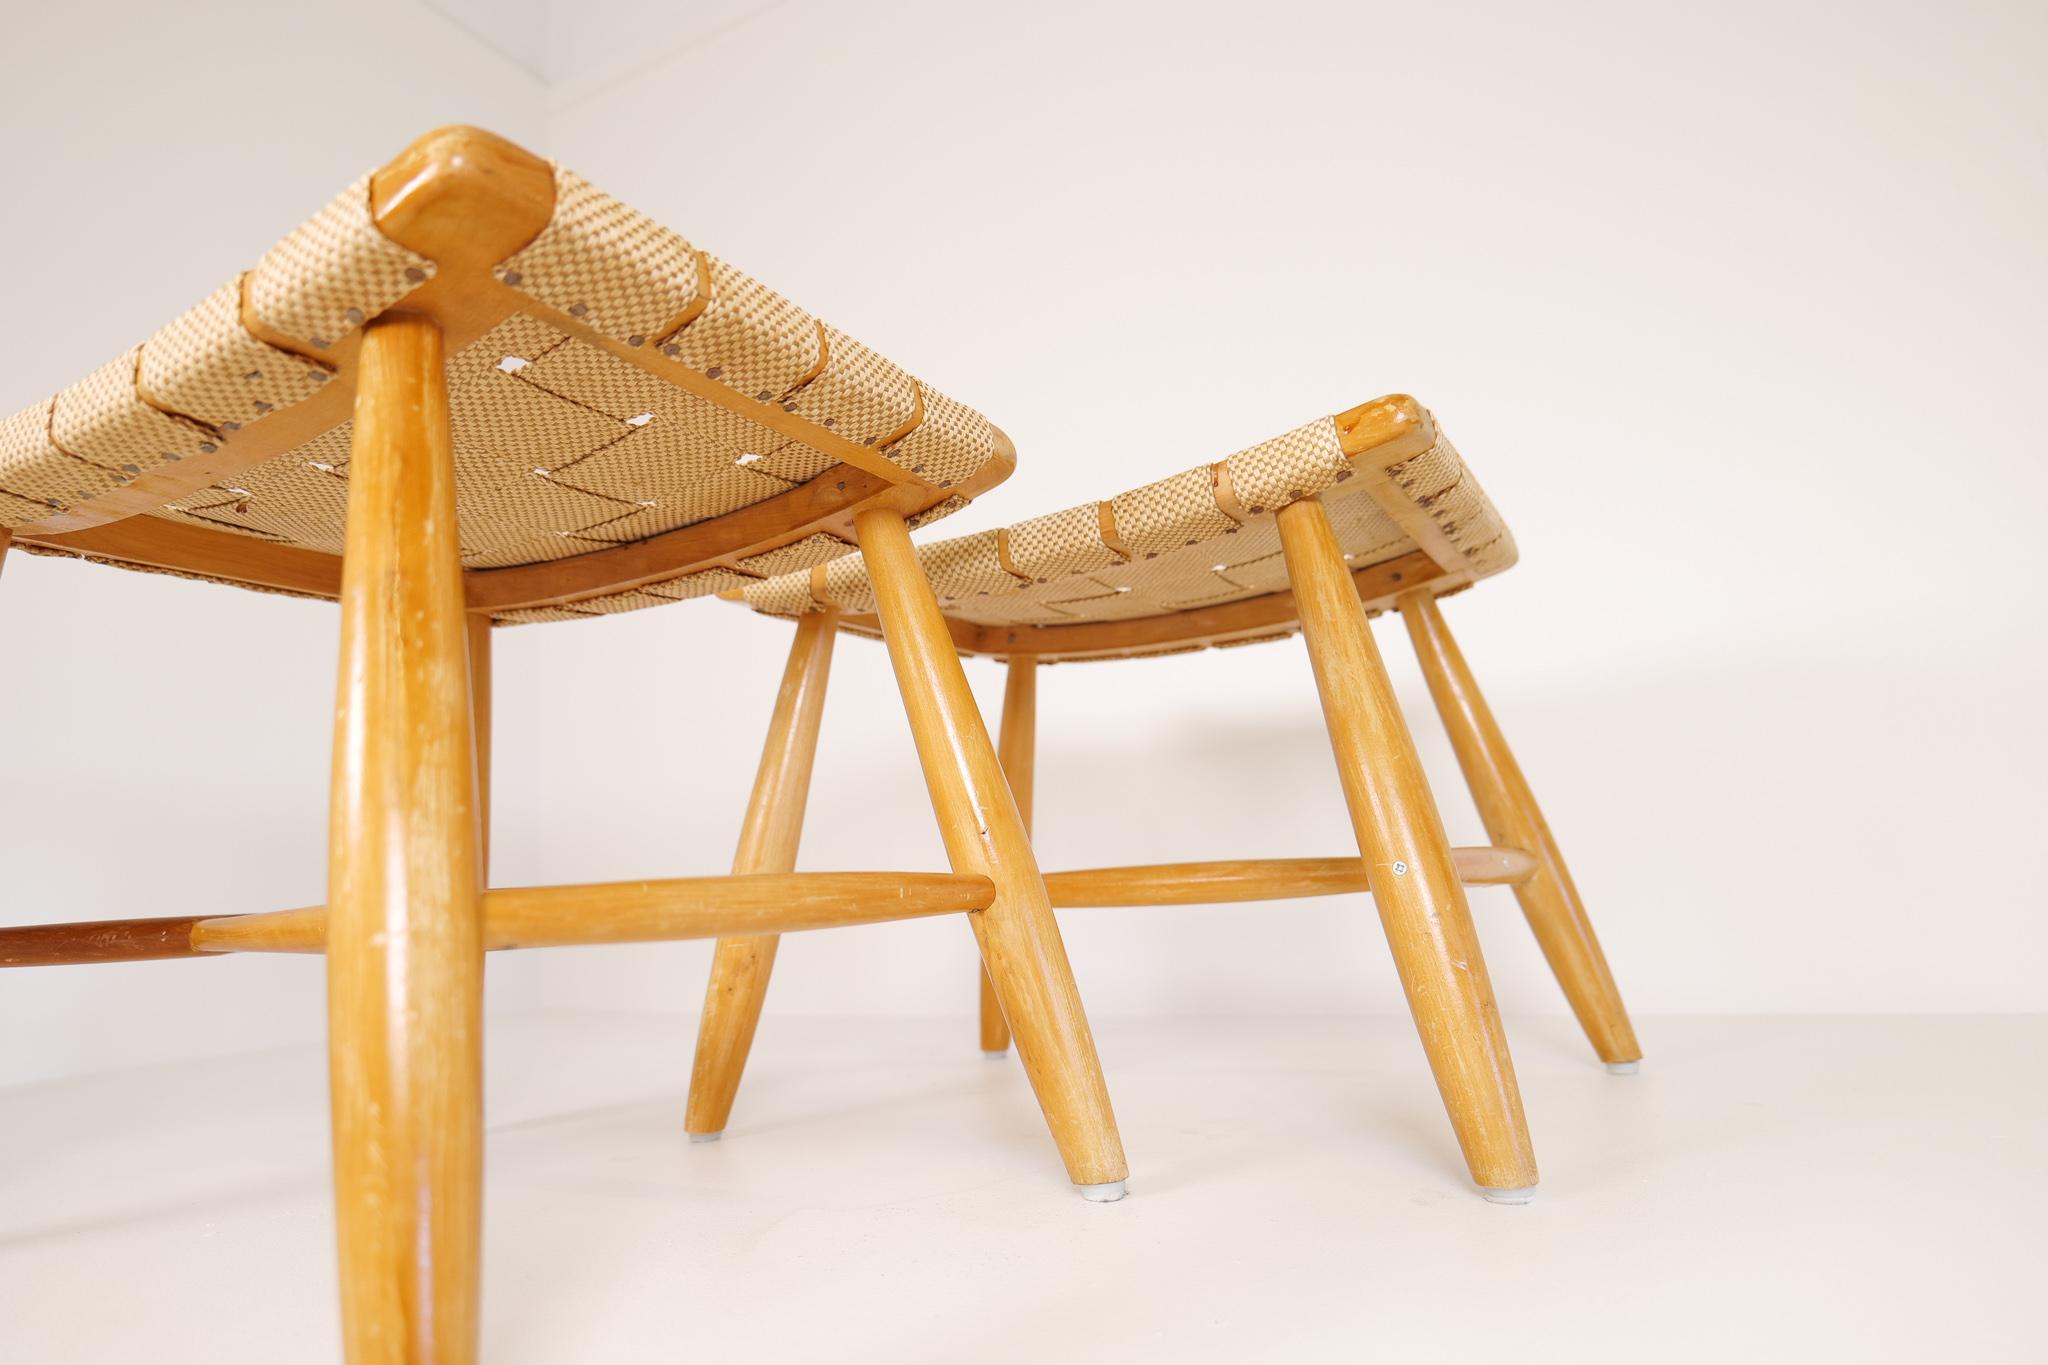 Midcentury Pair of Swedish Stools in Lacquered Birch, 1960s For Sale 10